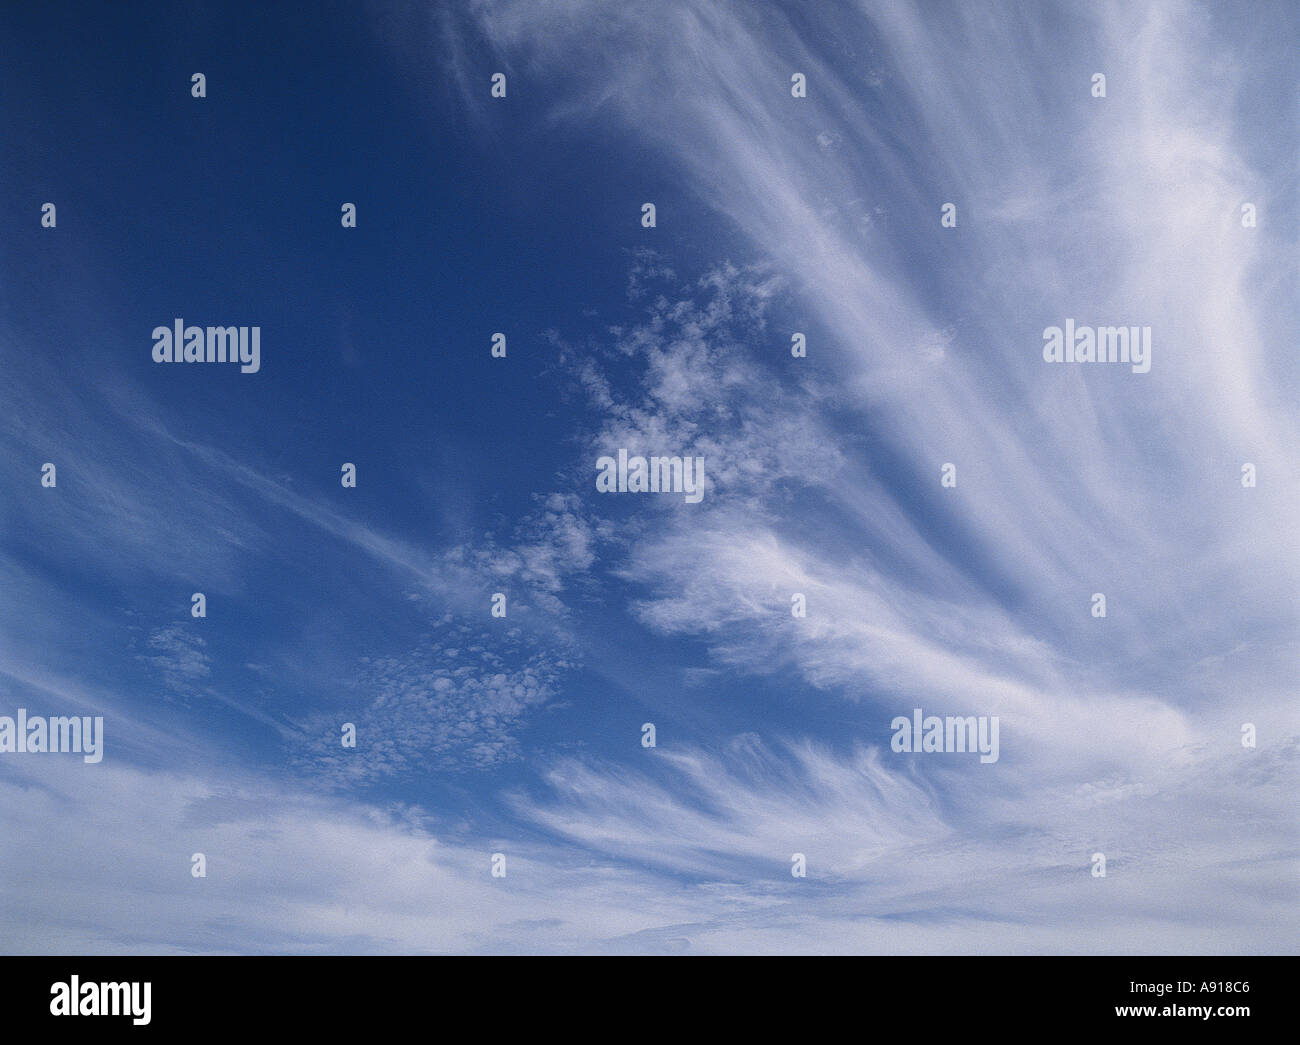 dh Cloud SKY WEATHER White whispy cloud blue sky copyspace background texture cirrus clouds backdrop with pattern Stock Photo